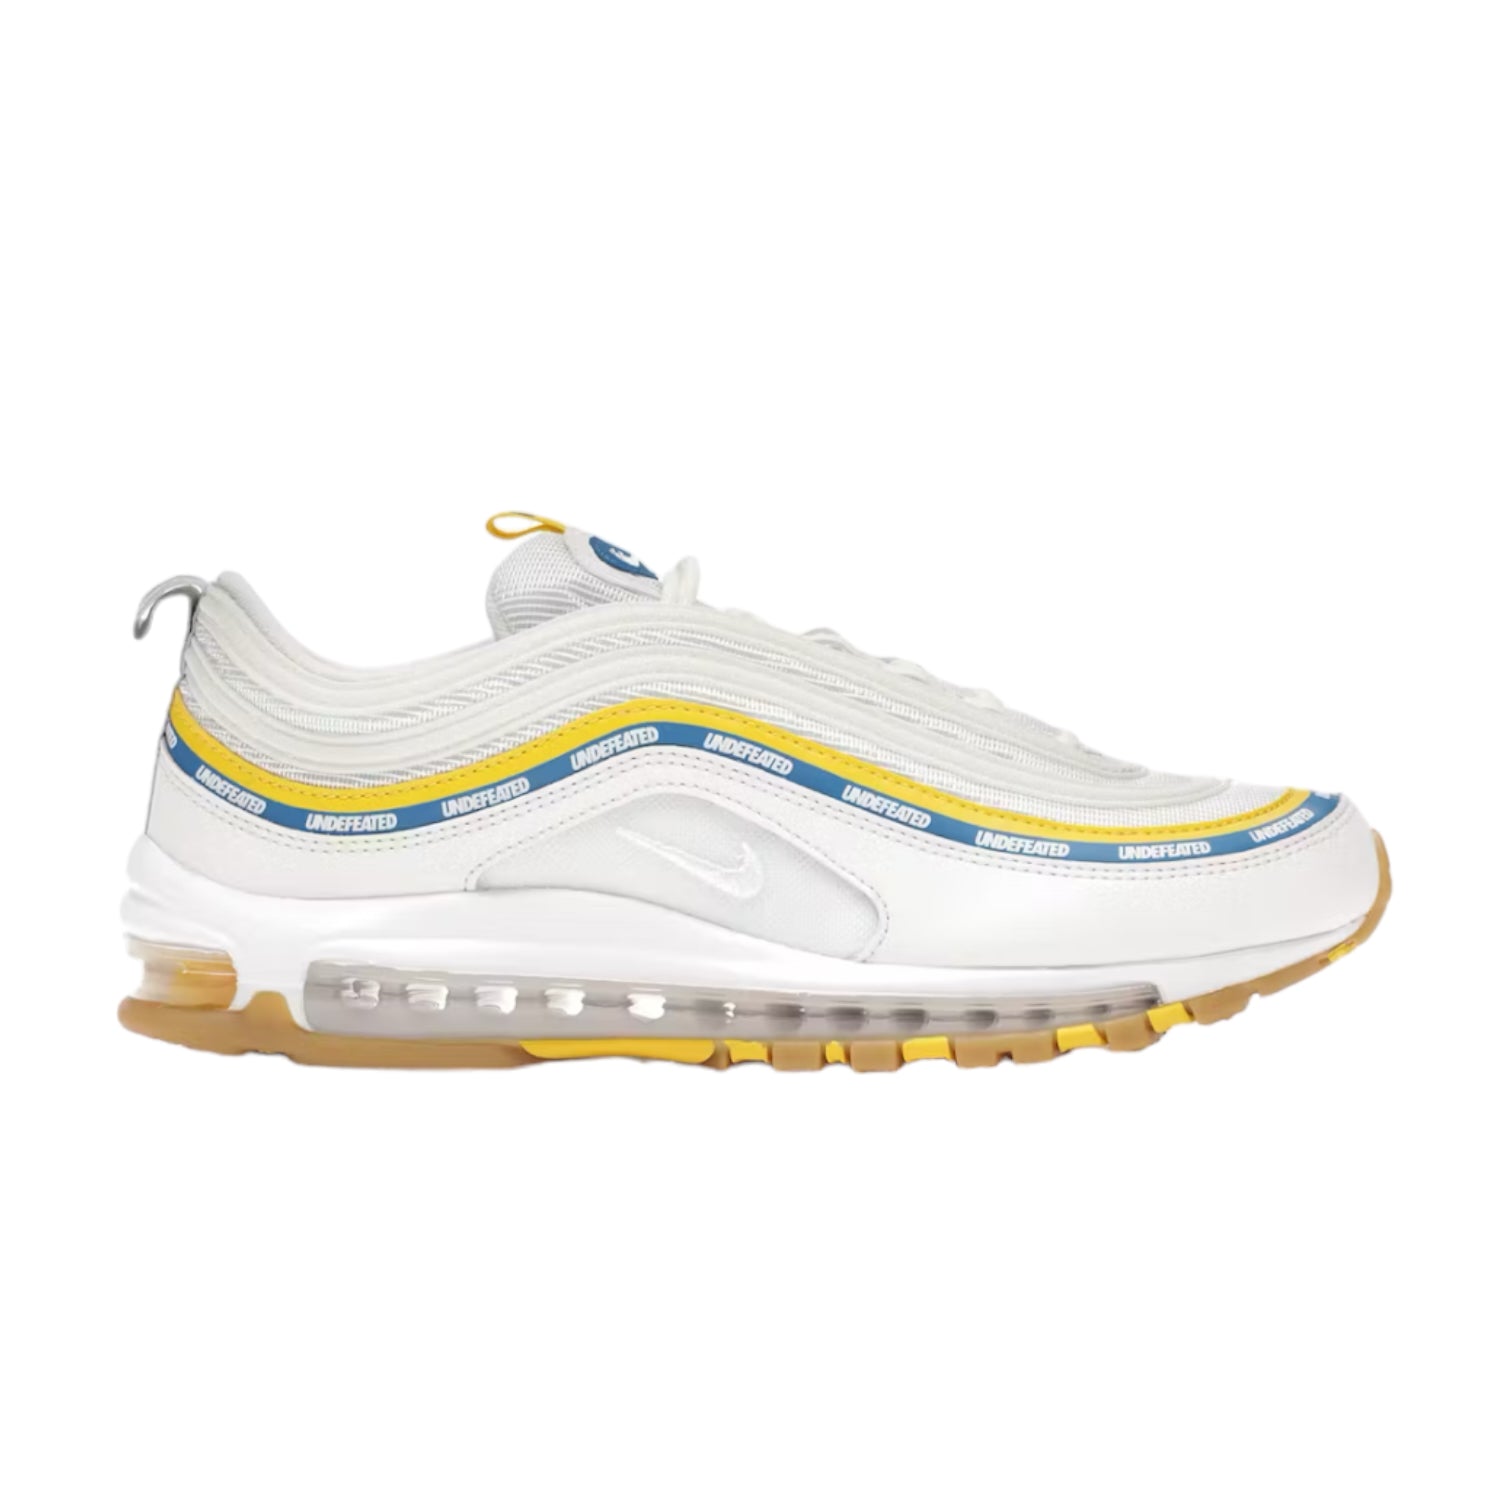 Undefeated x Nike Air Max 97 UCLA